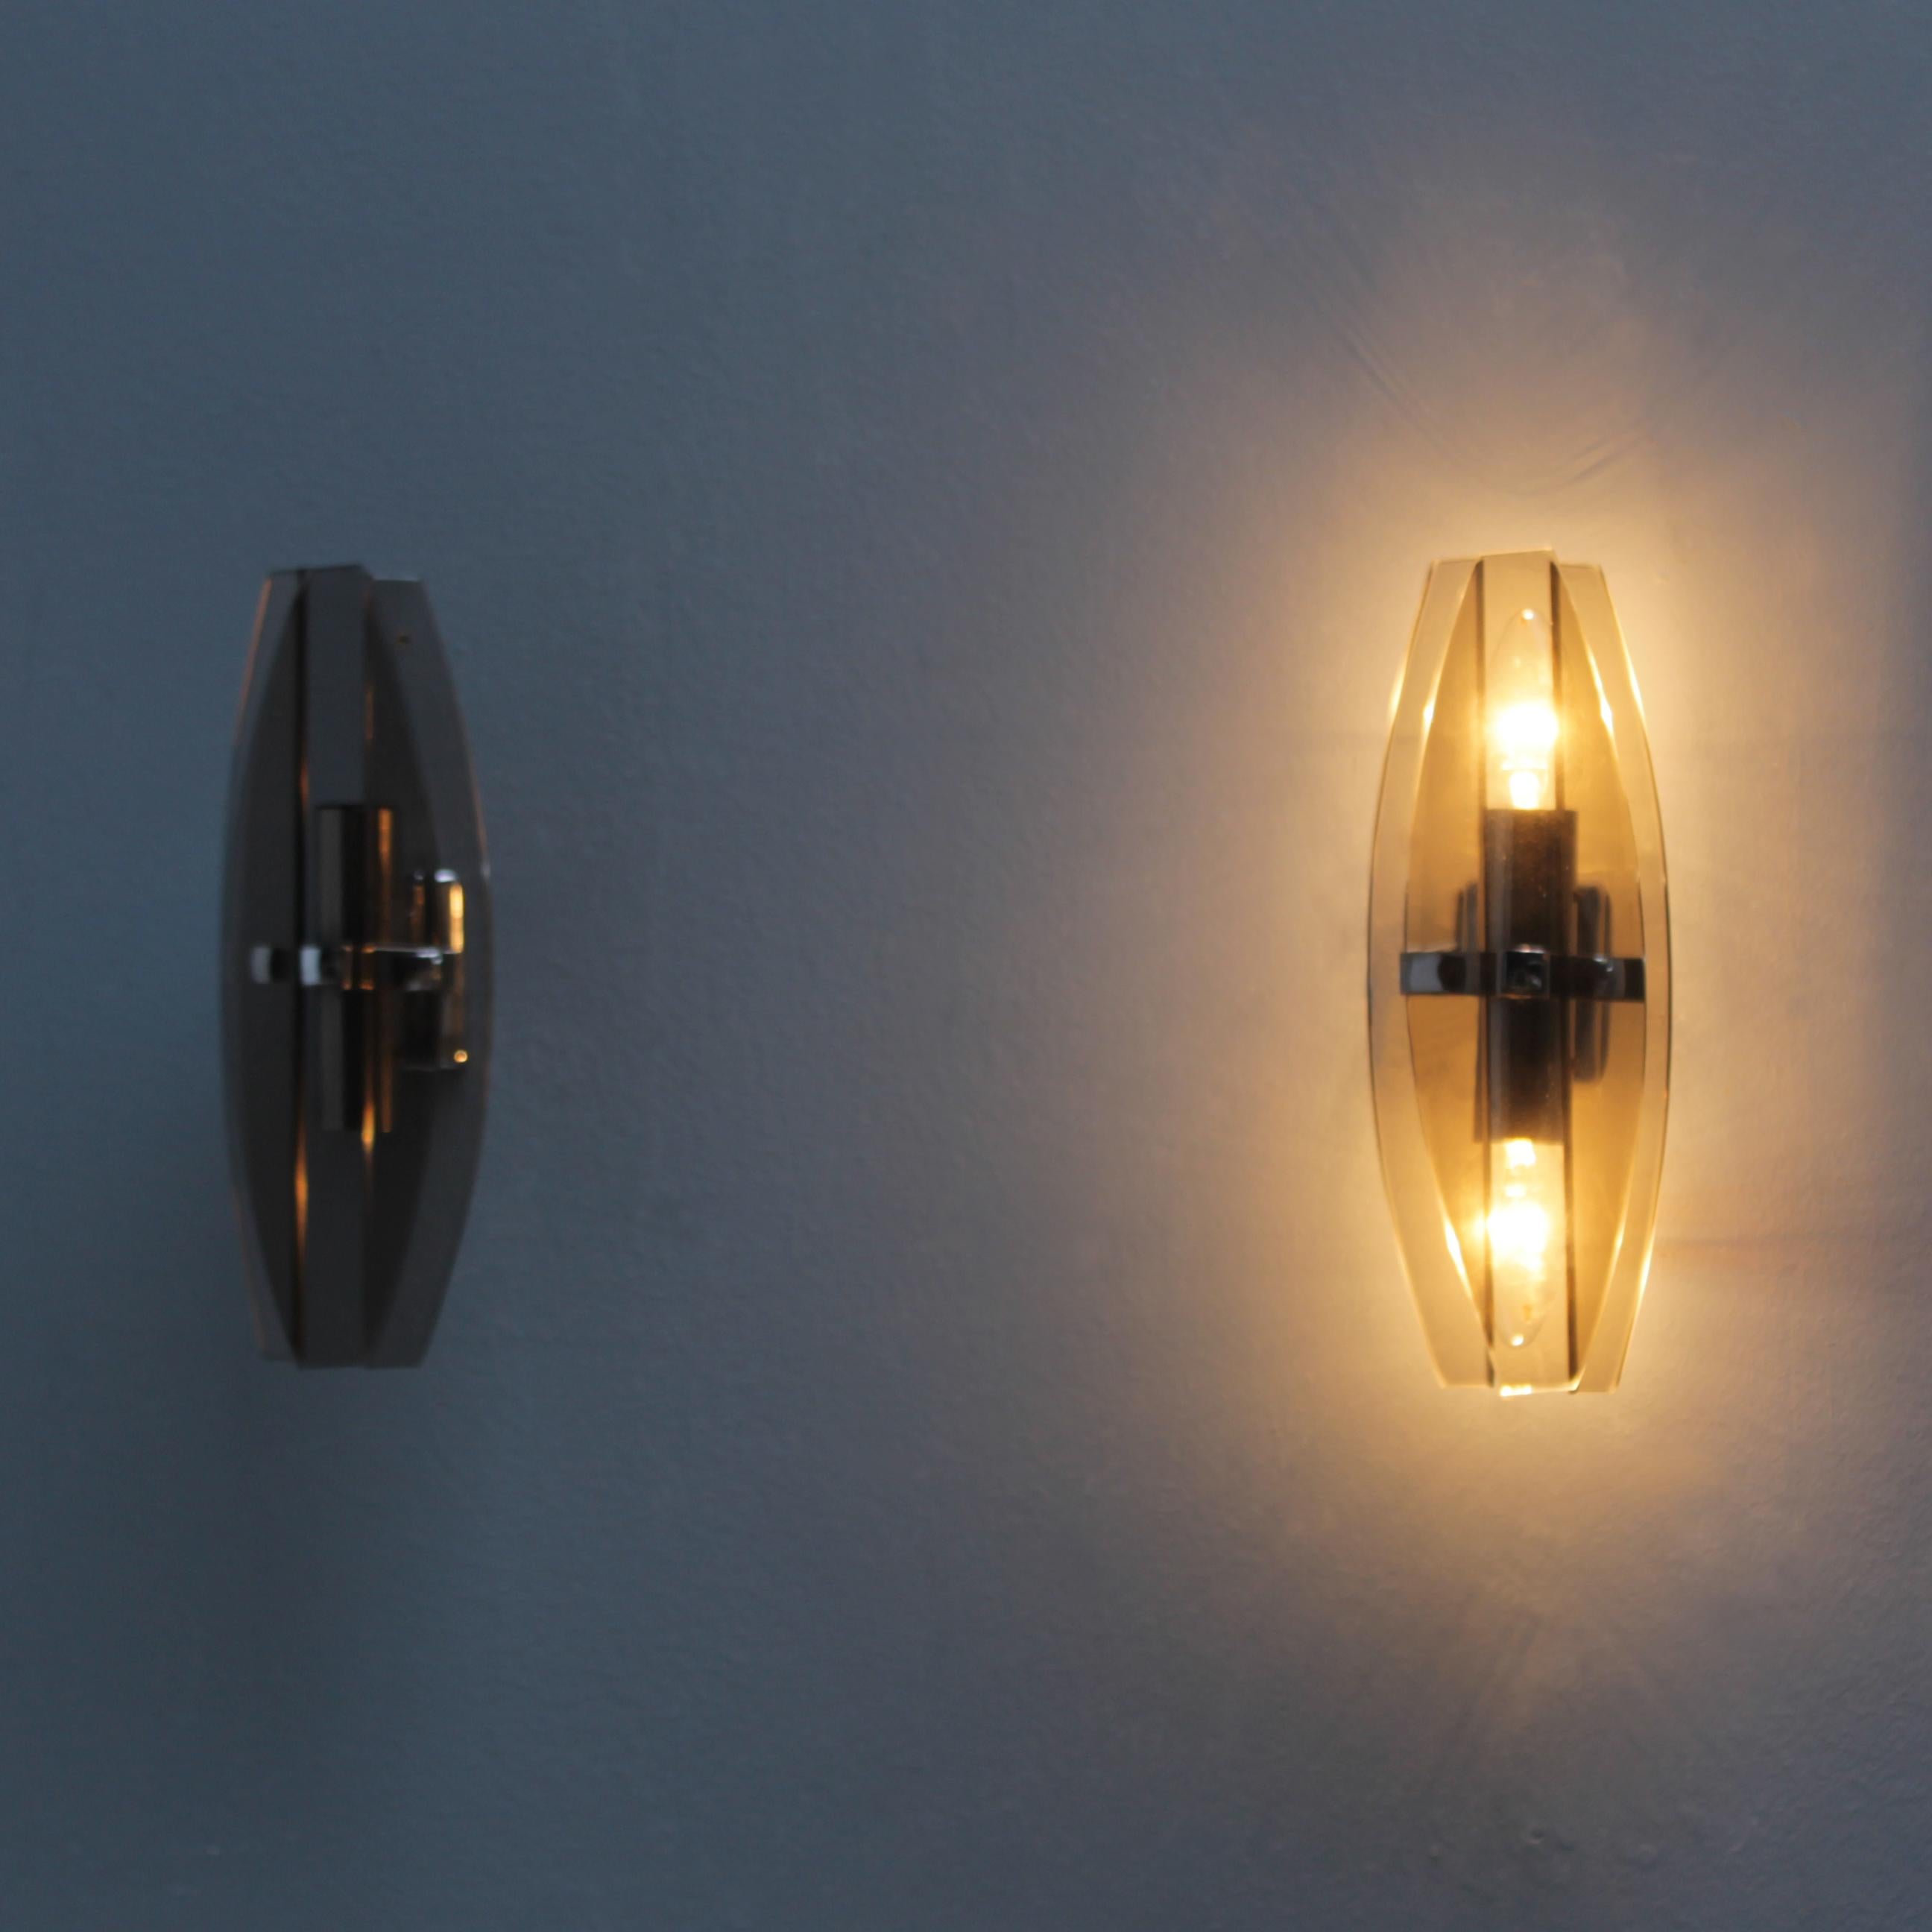 Mid-20th Century Pair of Glass Sconces in the manner of Fontana Arte